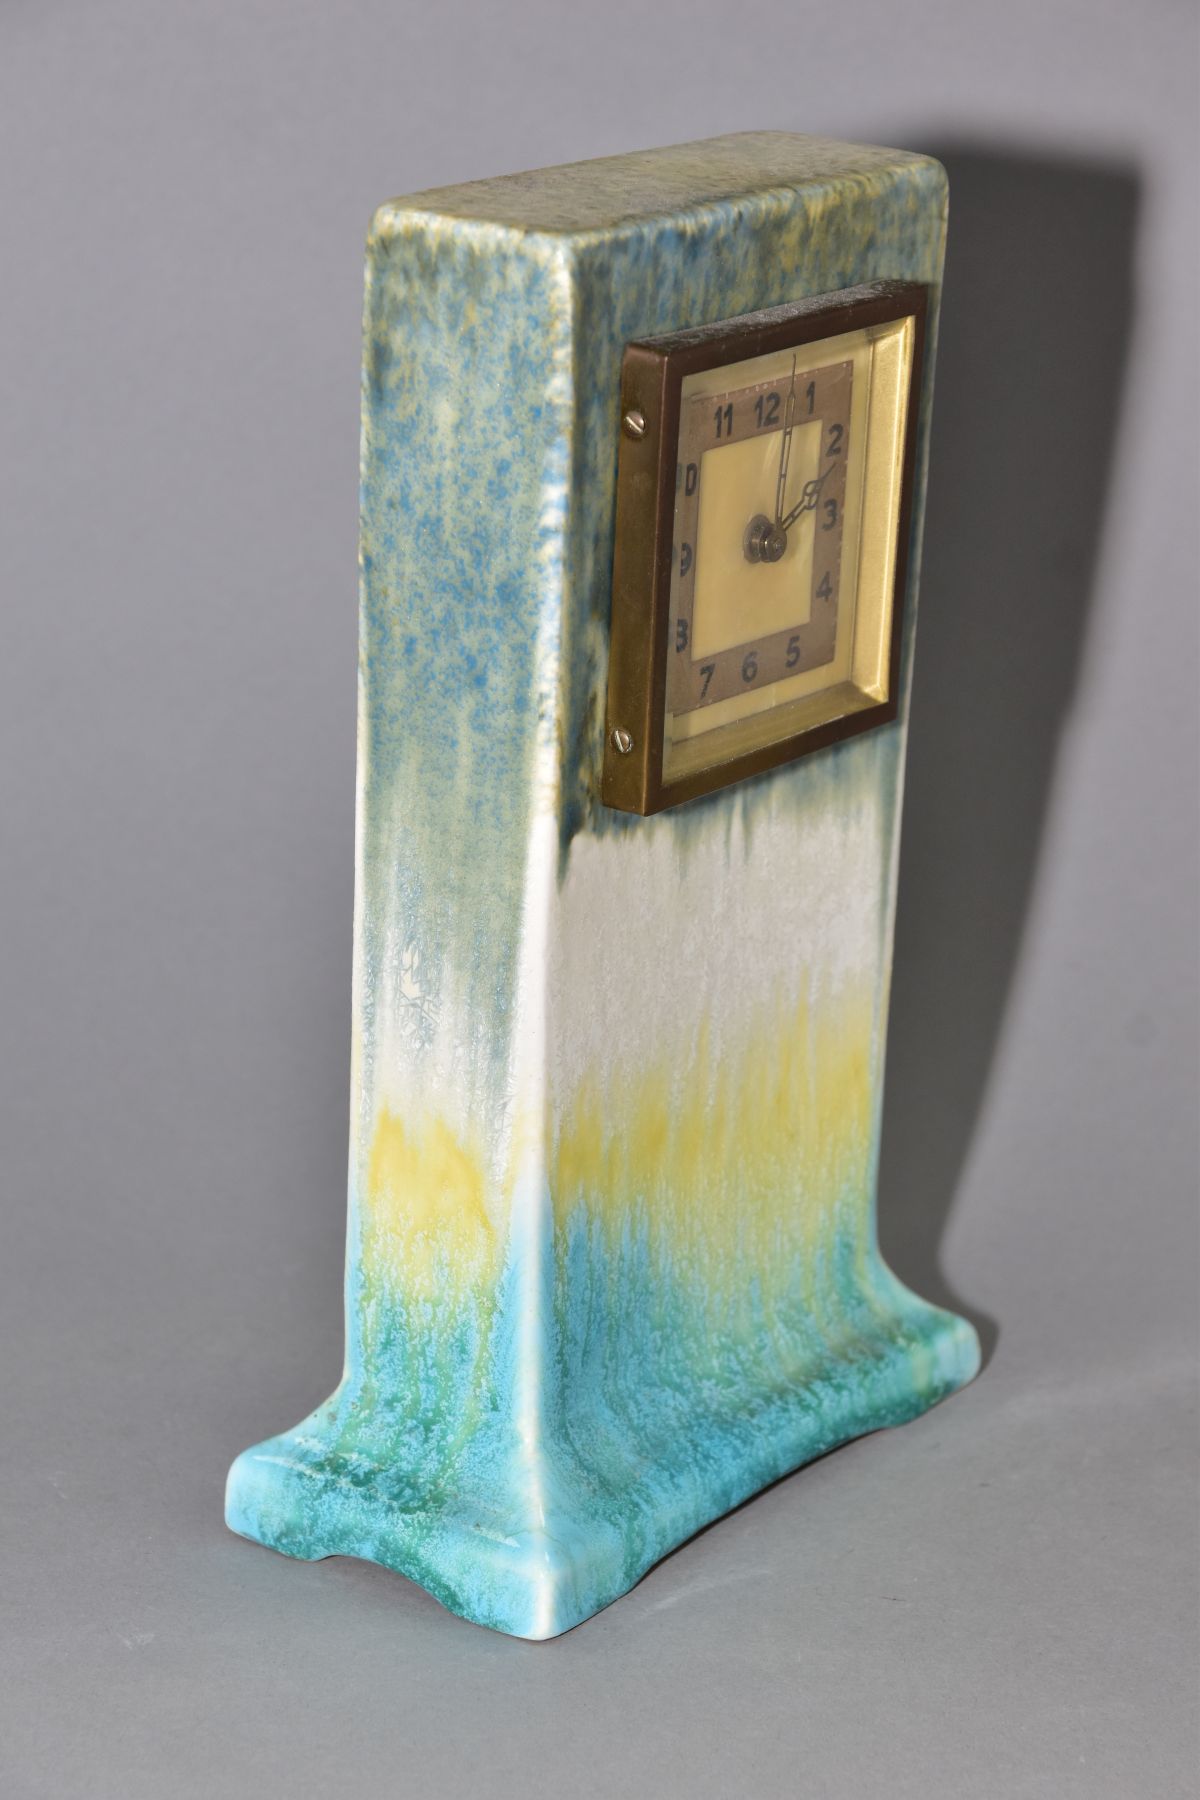 RUSKIN POTTERY, a rectangular clock case with flared base, matt green fading to white and yellow, - Image 3 of 5